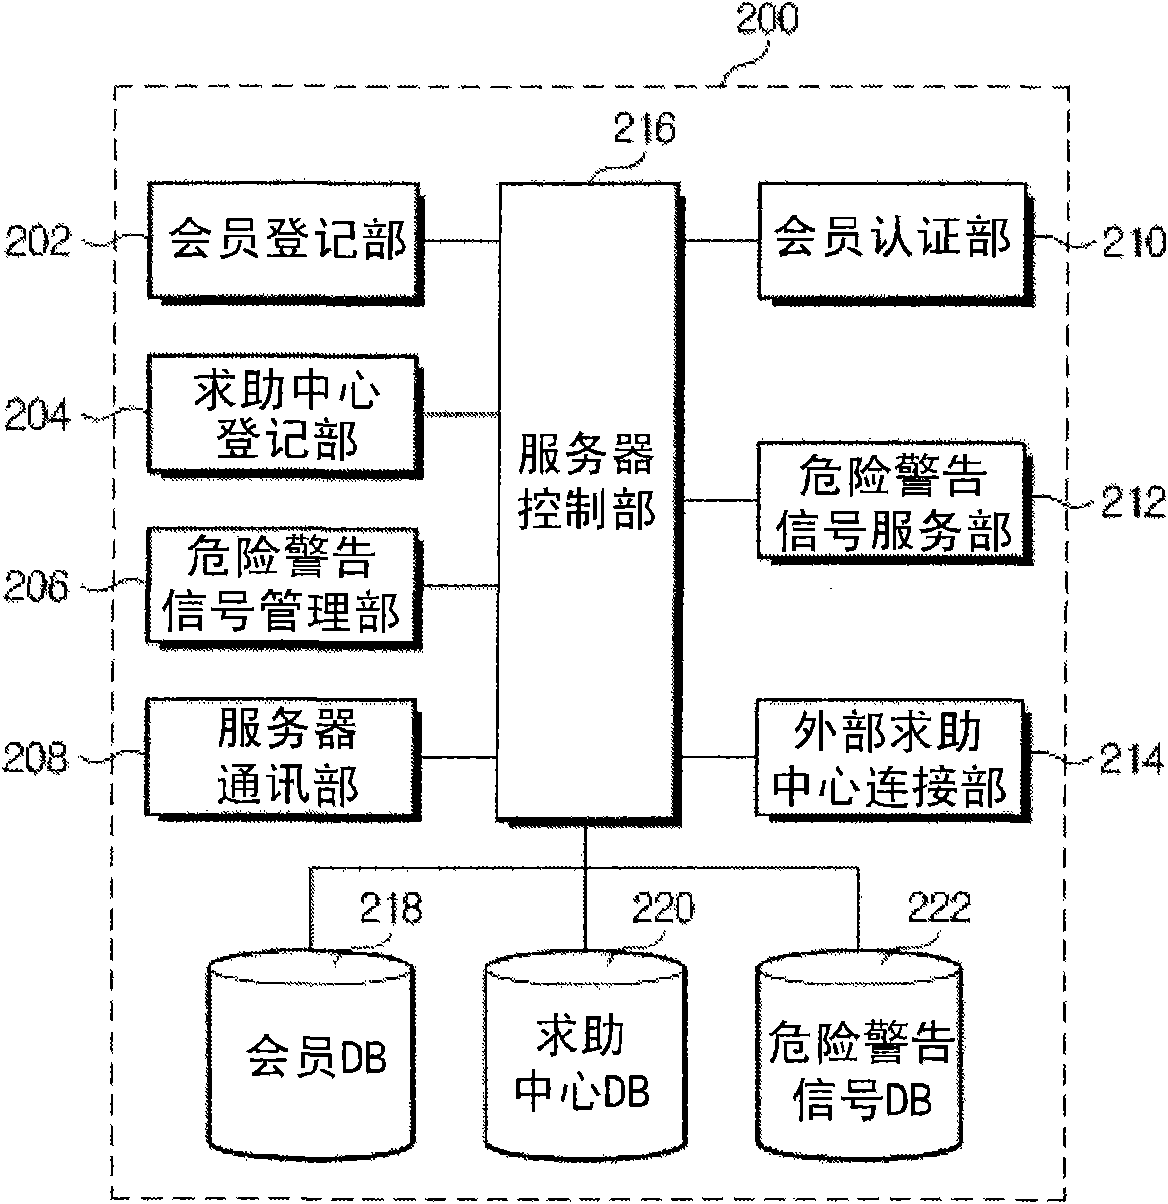 Vehicle emergency preventive terminal device and internet system using facial recognition technology